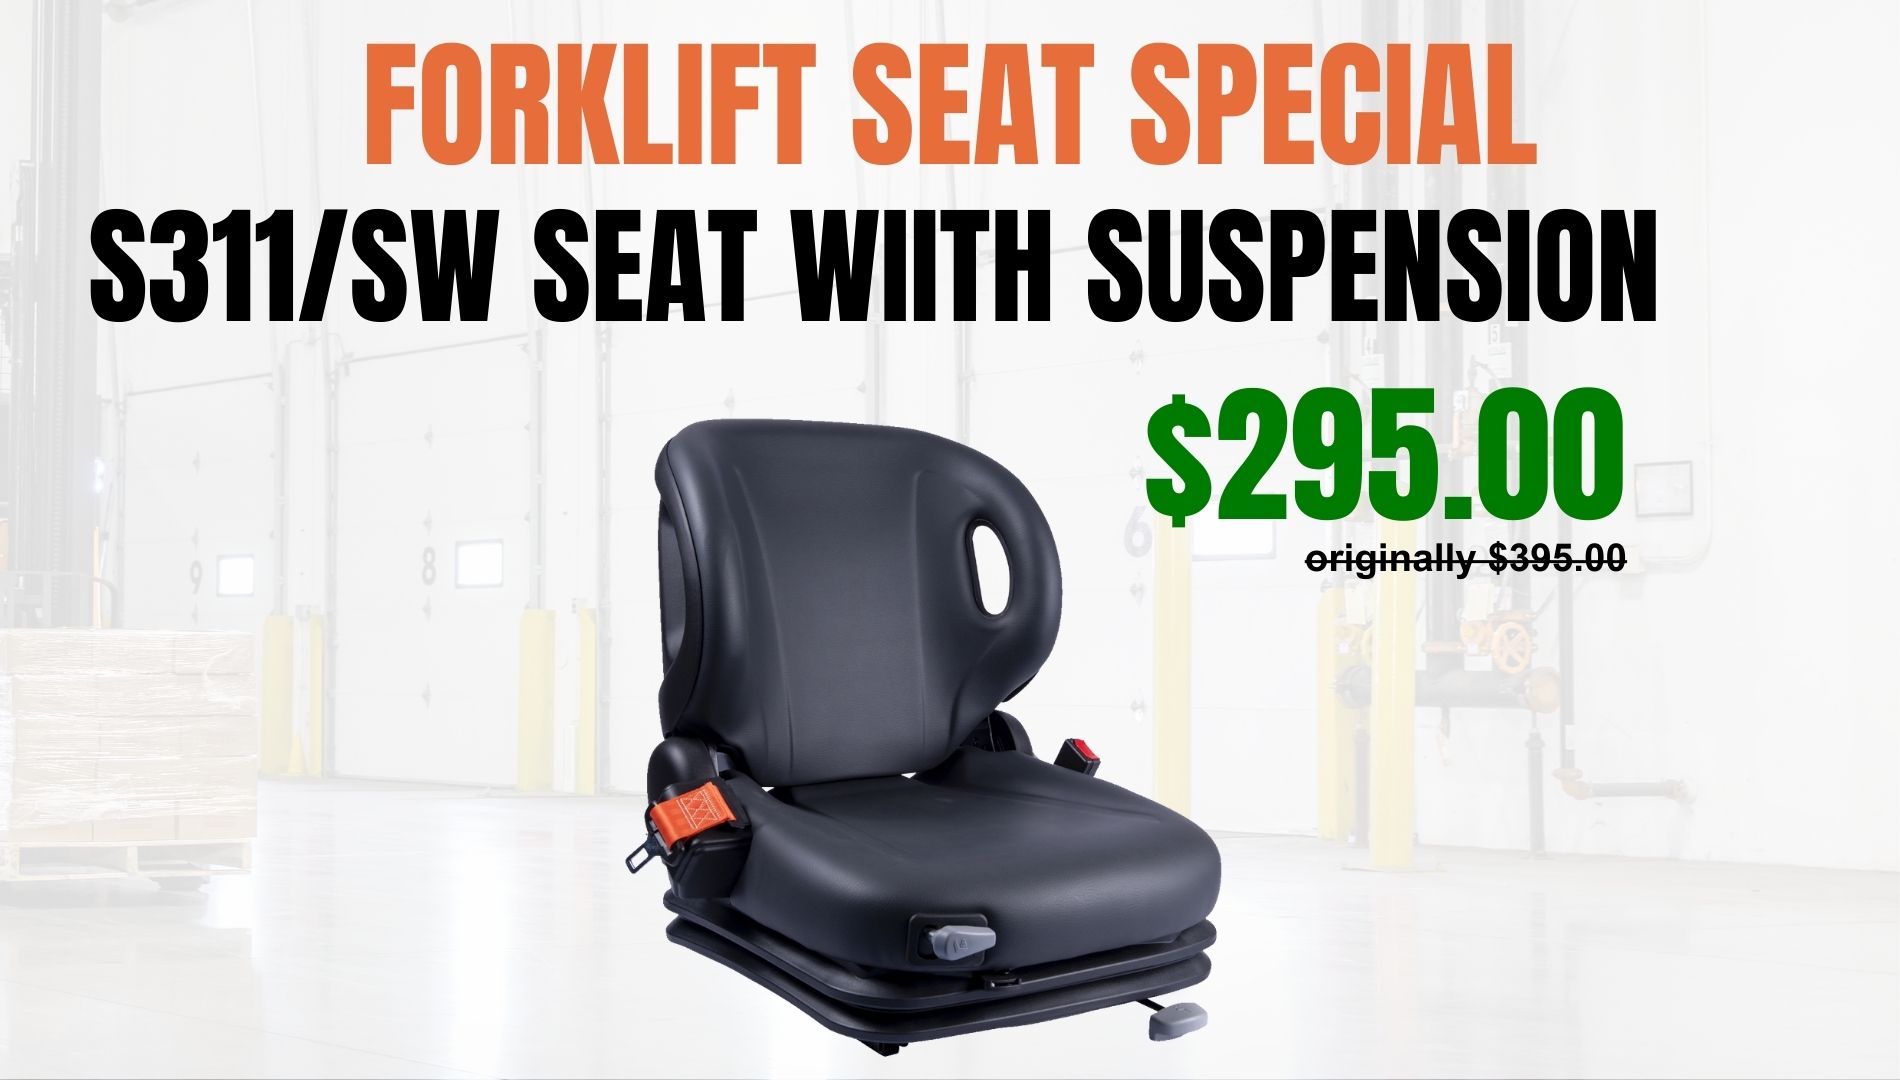 Blog post - S311/SW Forklift Seat Sale With Suspension